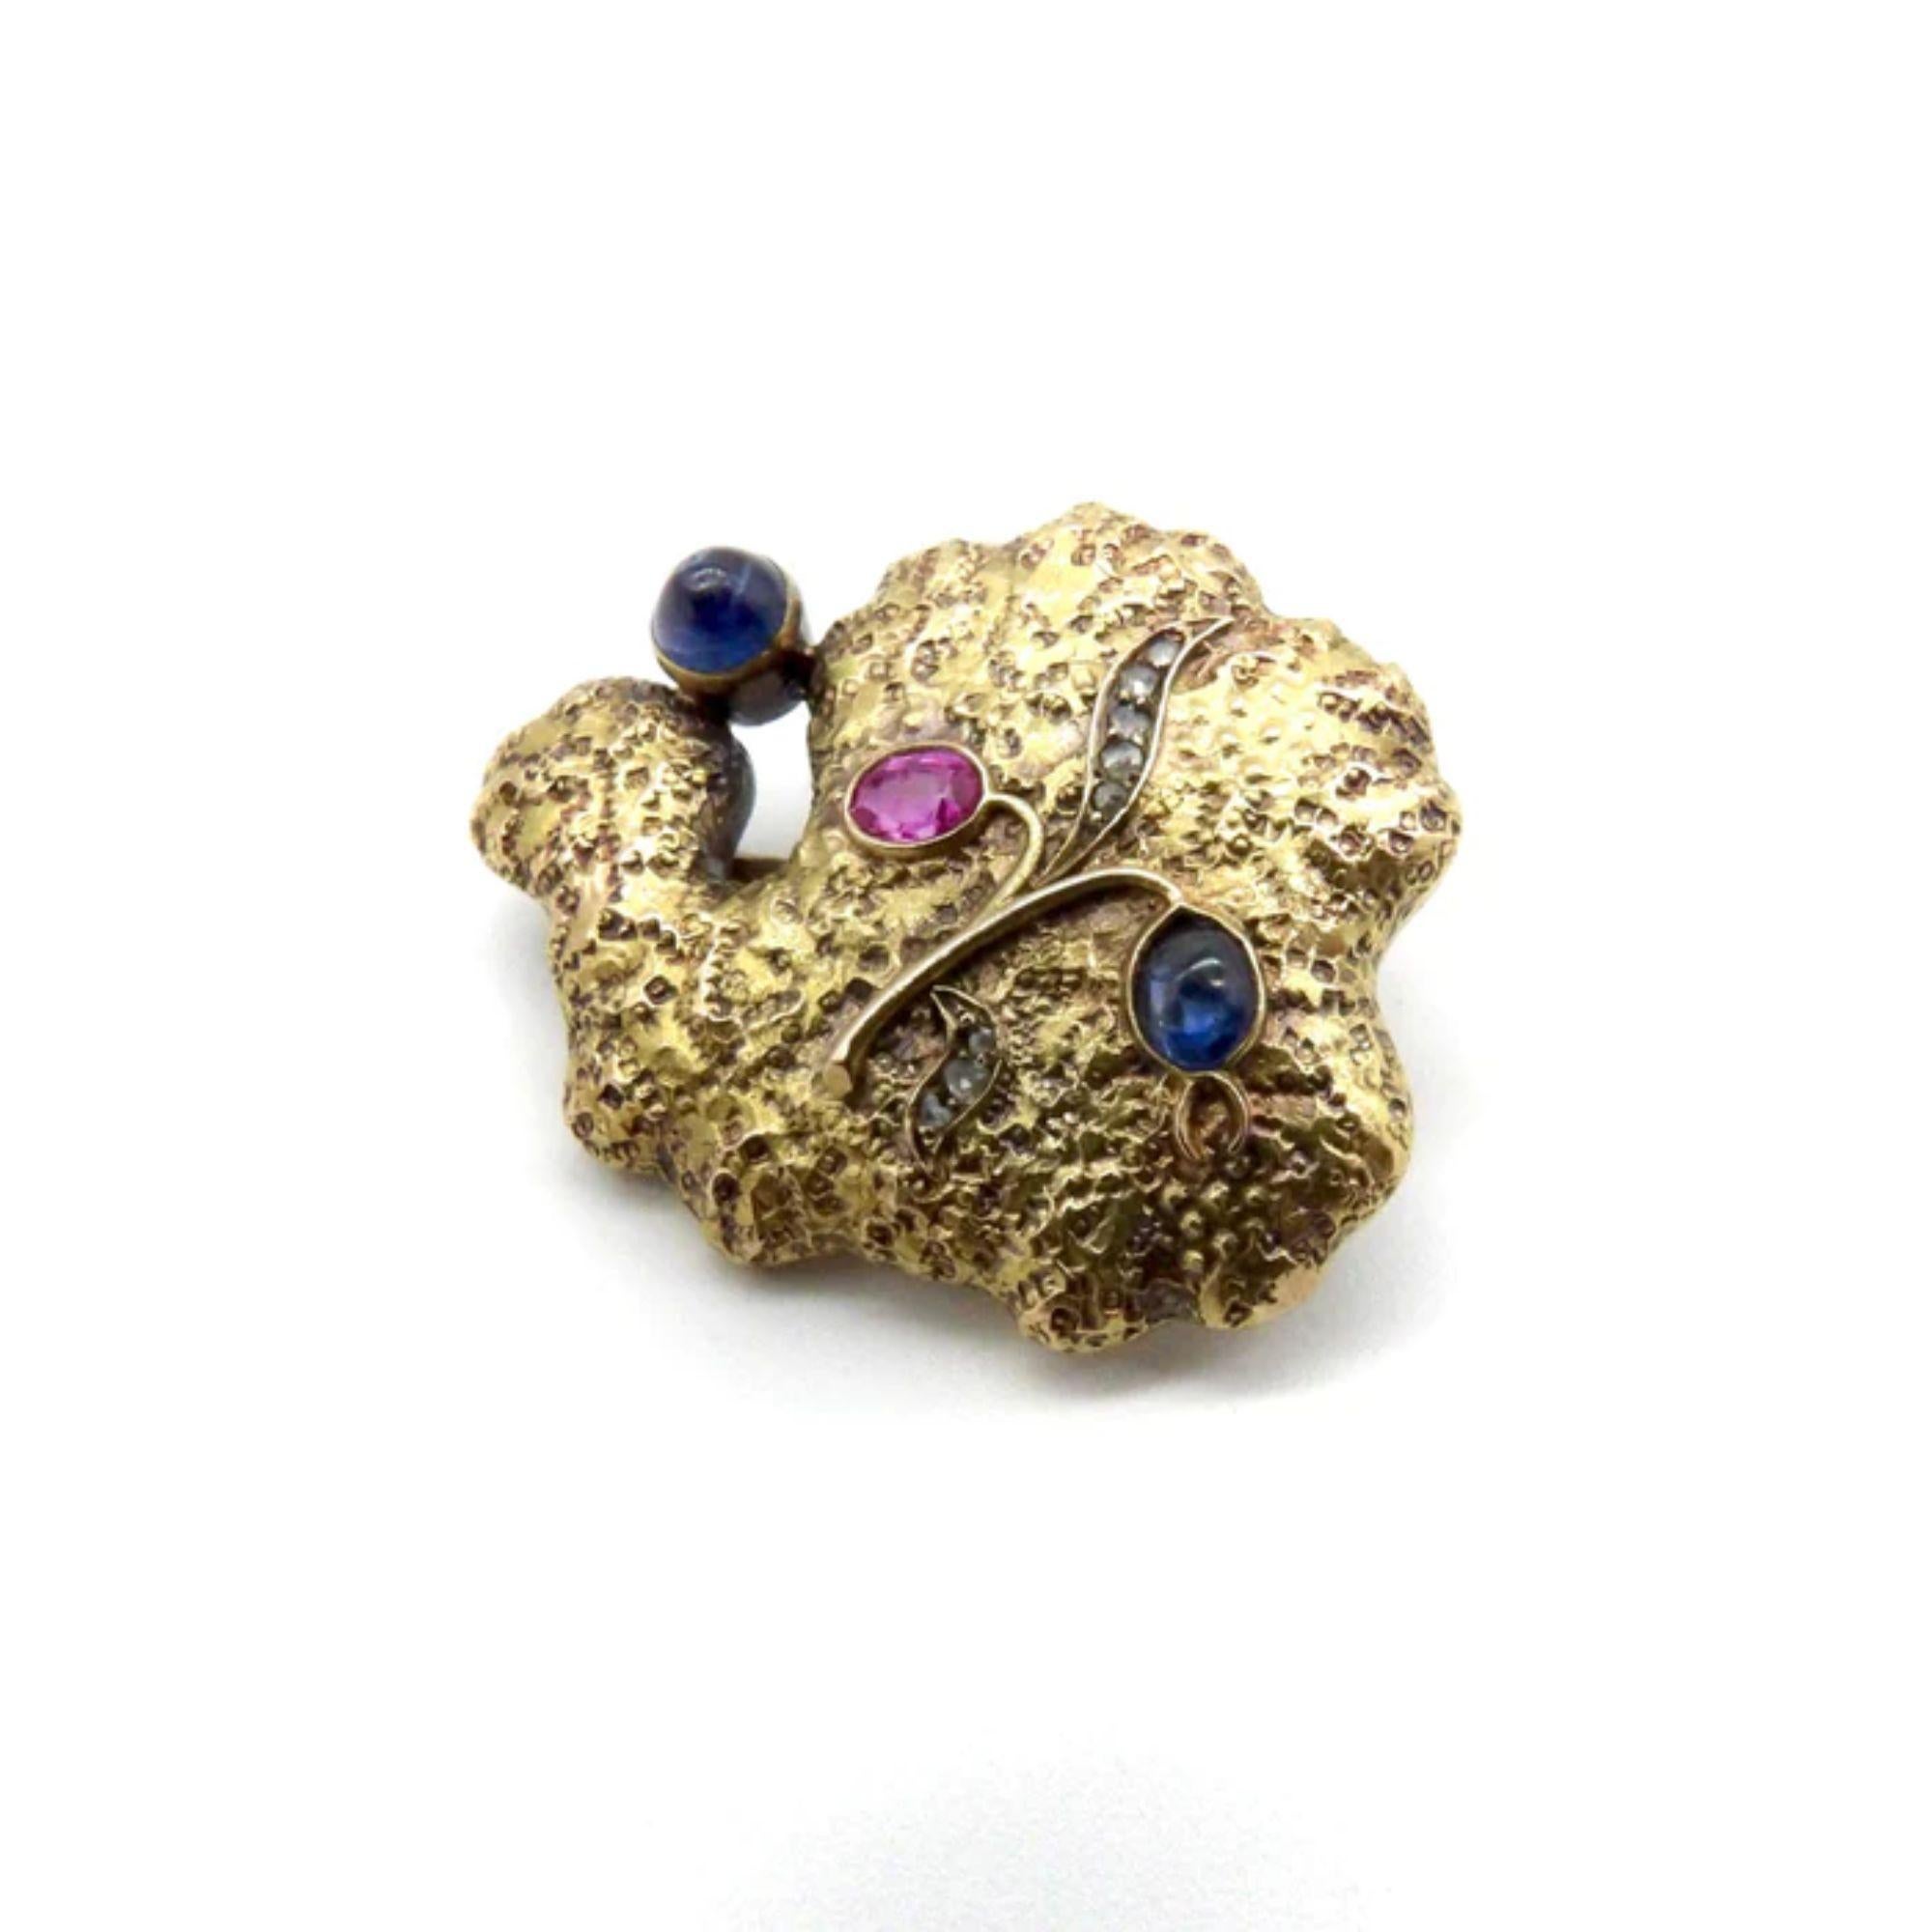 14K Russian Gold Sapphire, Diamond, and Ruby Organic Brooch

This 14k gold Russian brooch has an organic form and wonderful texture that is reminiscent of a coral head . A beautiful patina adds to its elegance and the soft, abstract shape is